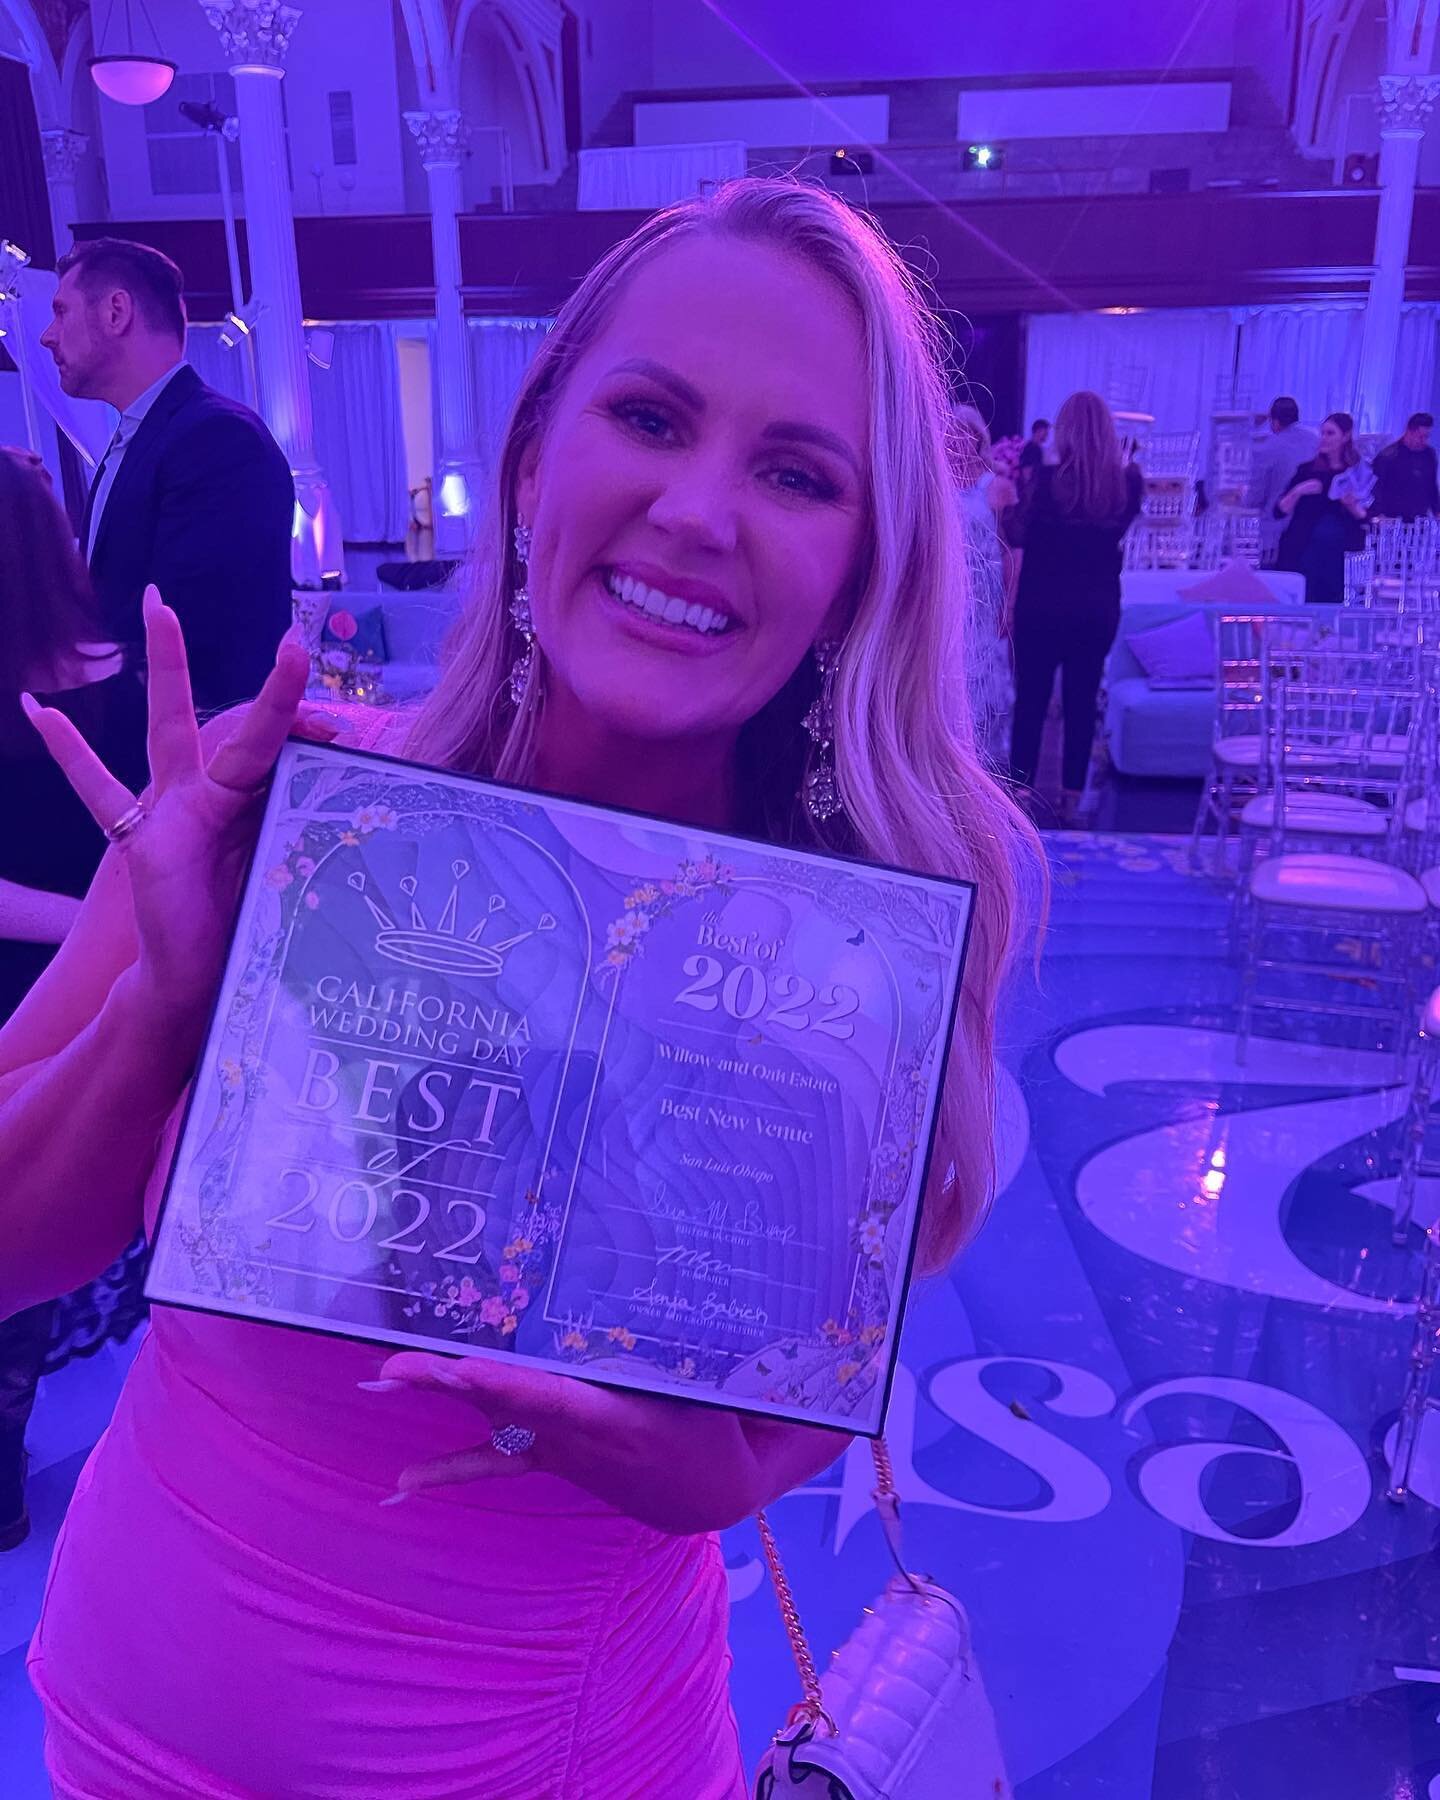 The hard work paid off! @californiaweddingday Best of 2022 - Best New Venue. I am so proud. So honored. So shocked. Just to be a finalist amongst these amazing venues was an honor - but to bring this HOME!!!! I can&rsquo;t 😭 this one&rsquo;s for you